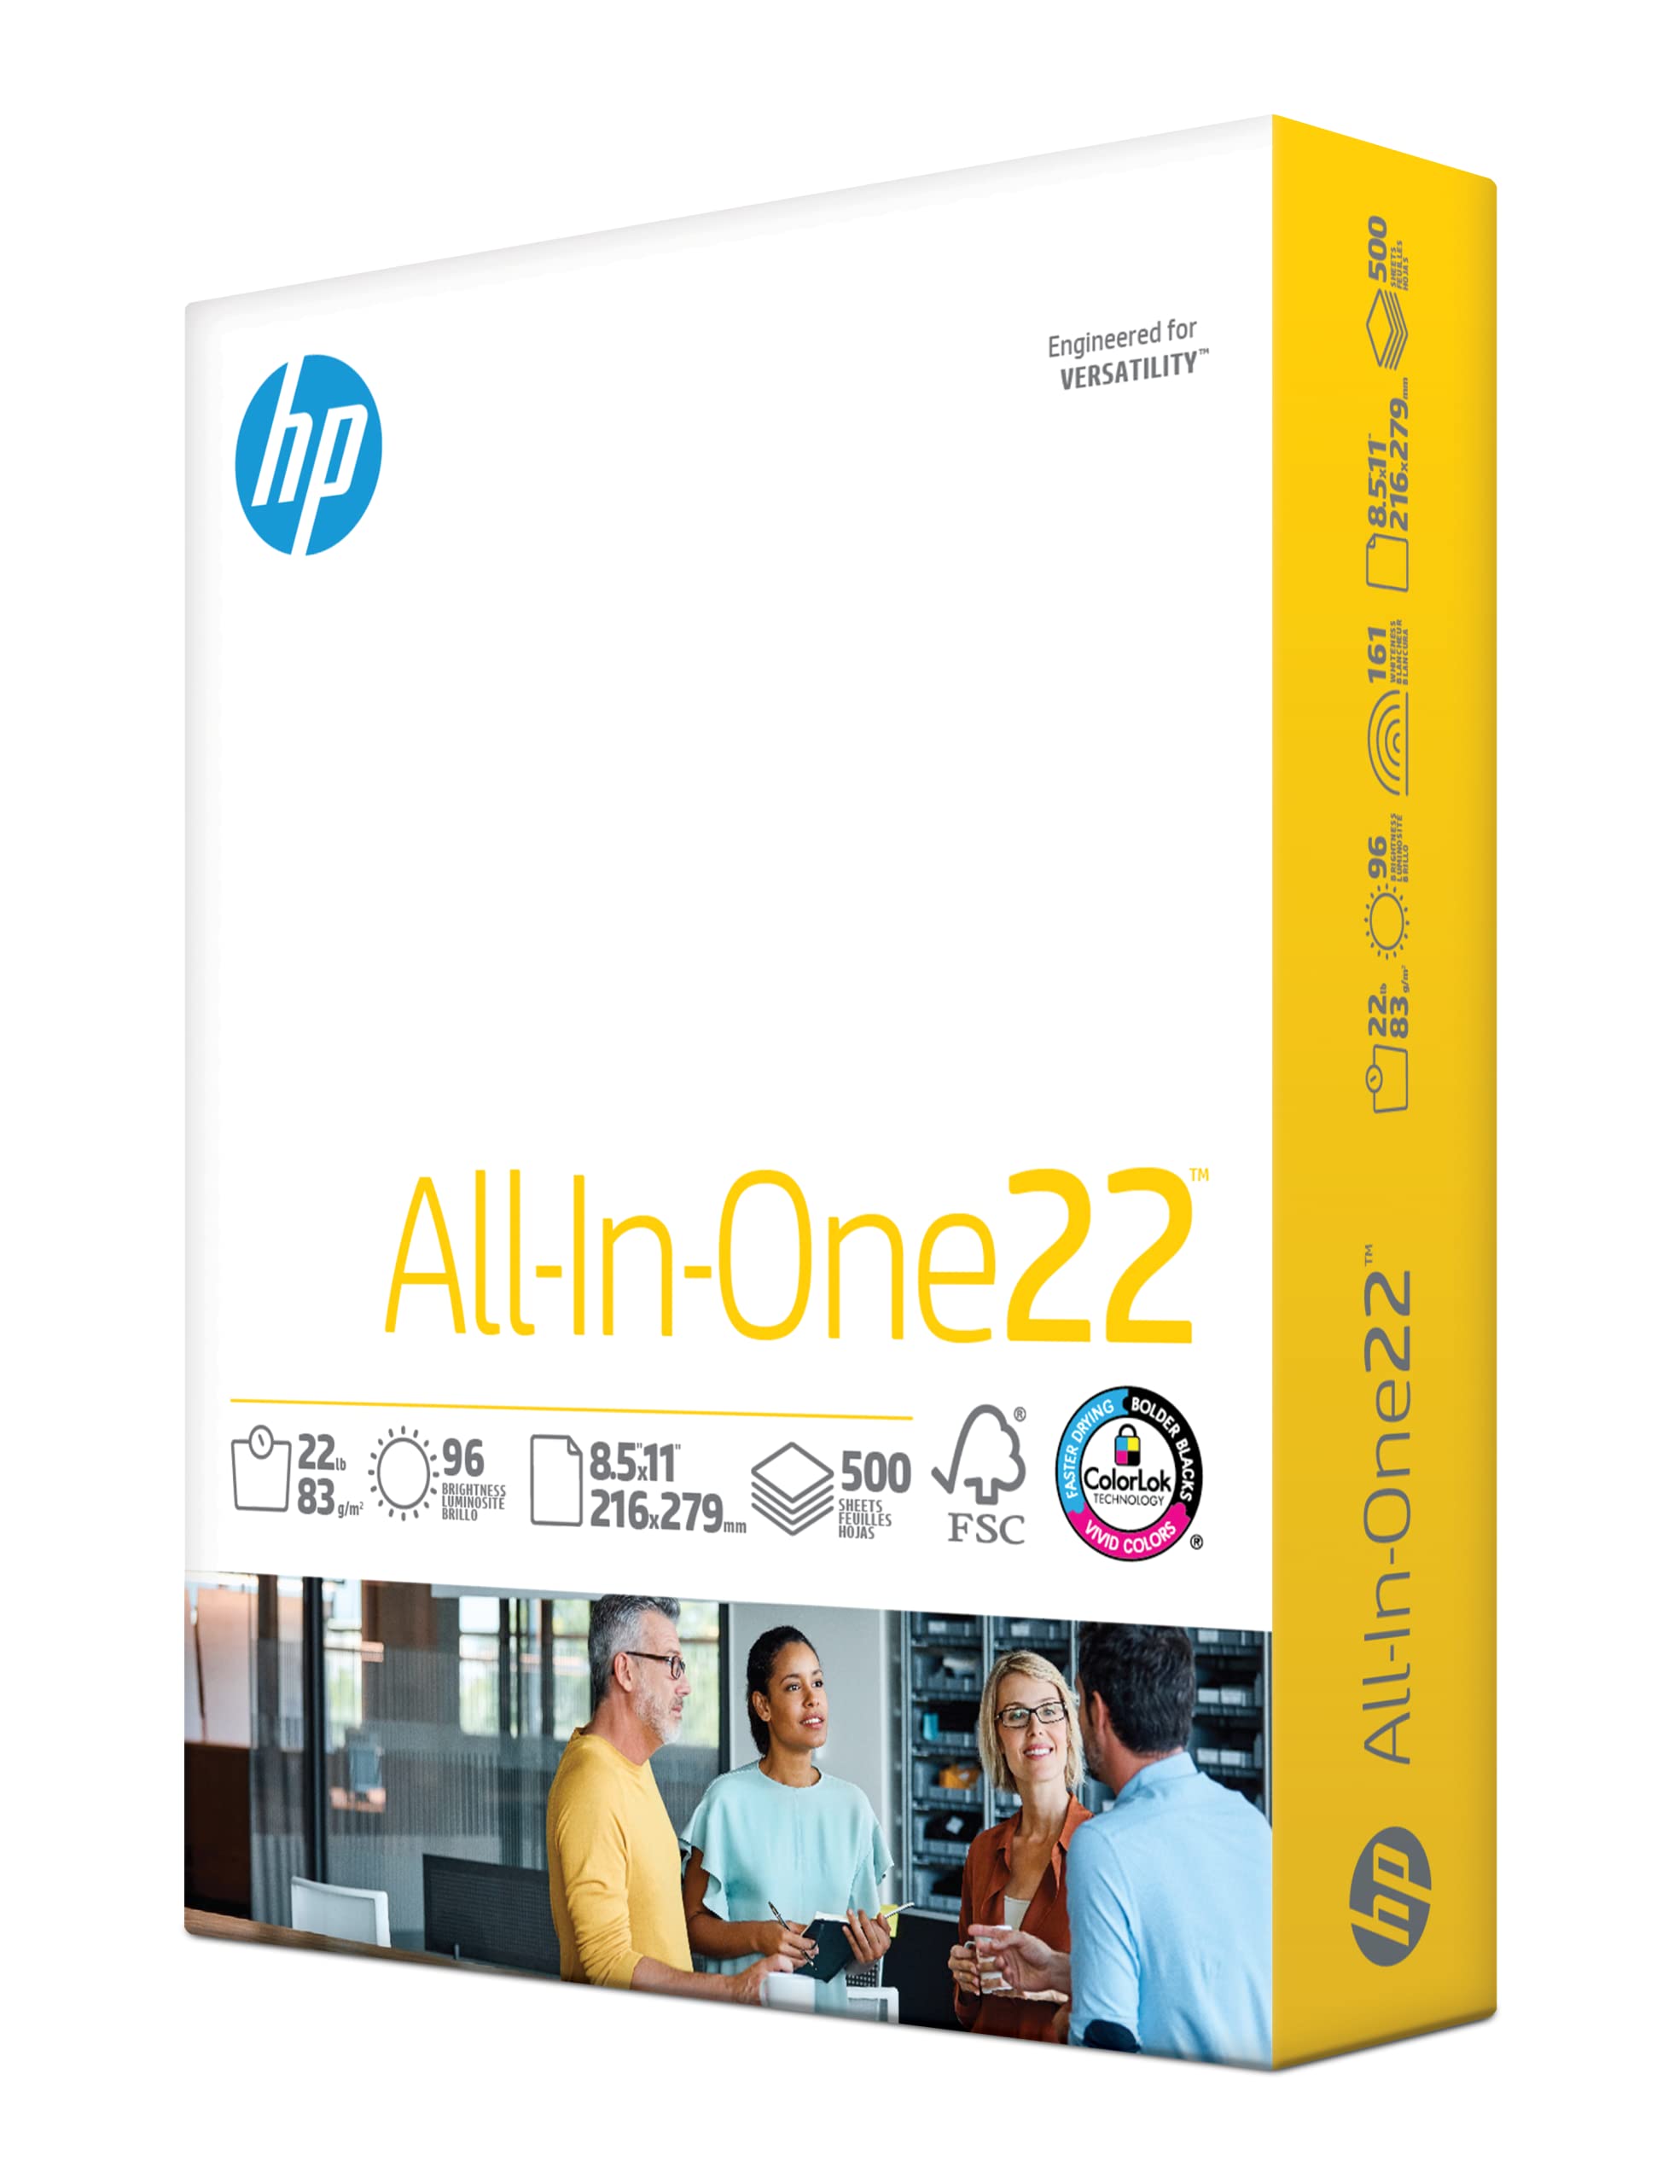 HP Papers HP Printer Paper | 8.5 x 11 Paper | All In One 22 lb | 1 Ream - 500 Sheets | 96 Bright | Made in USA - FSC Certified | 207010R